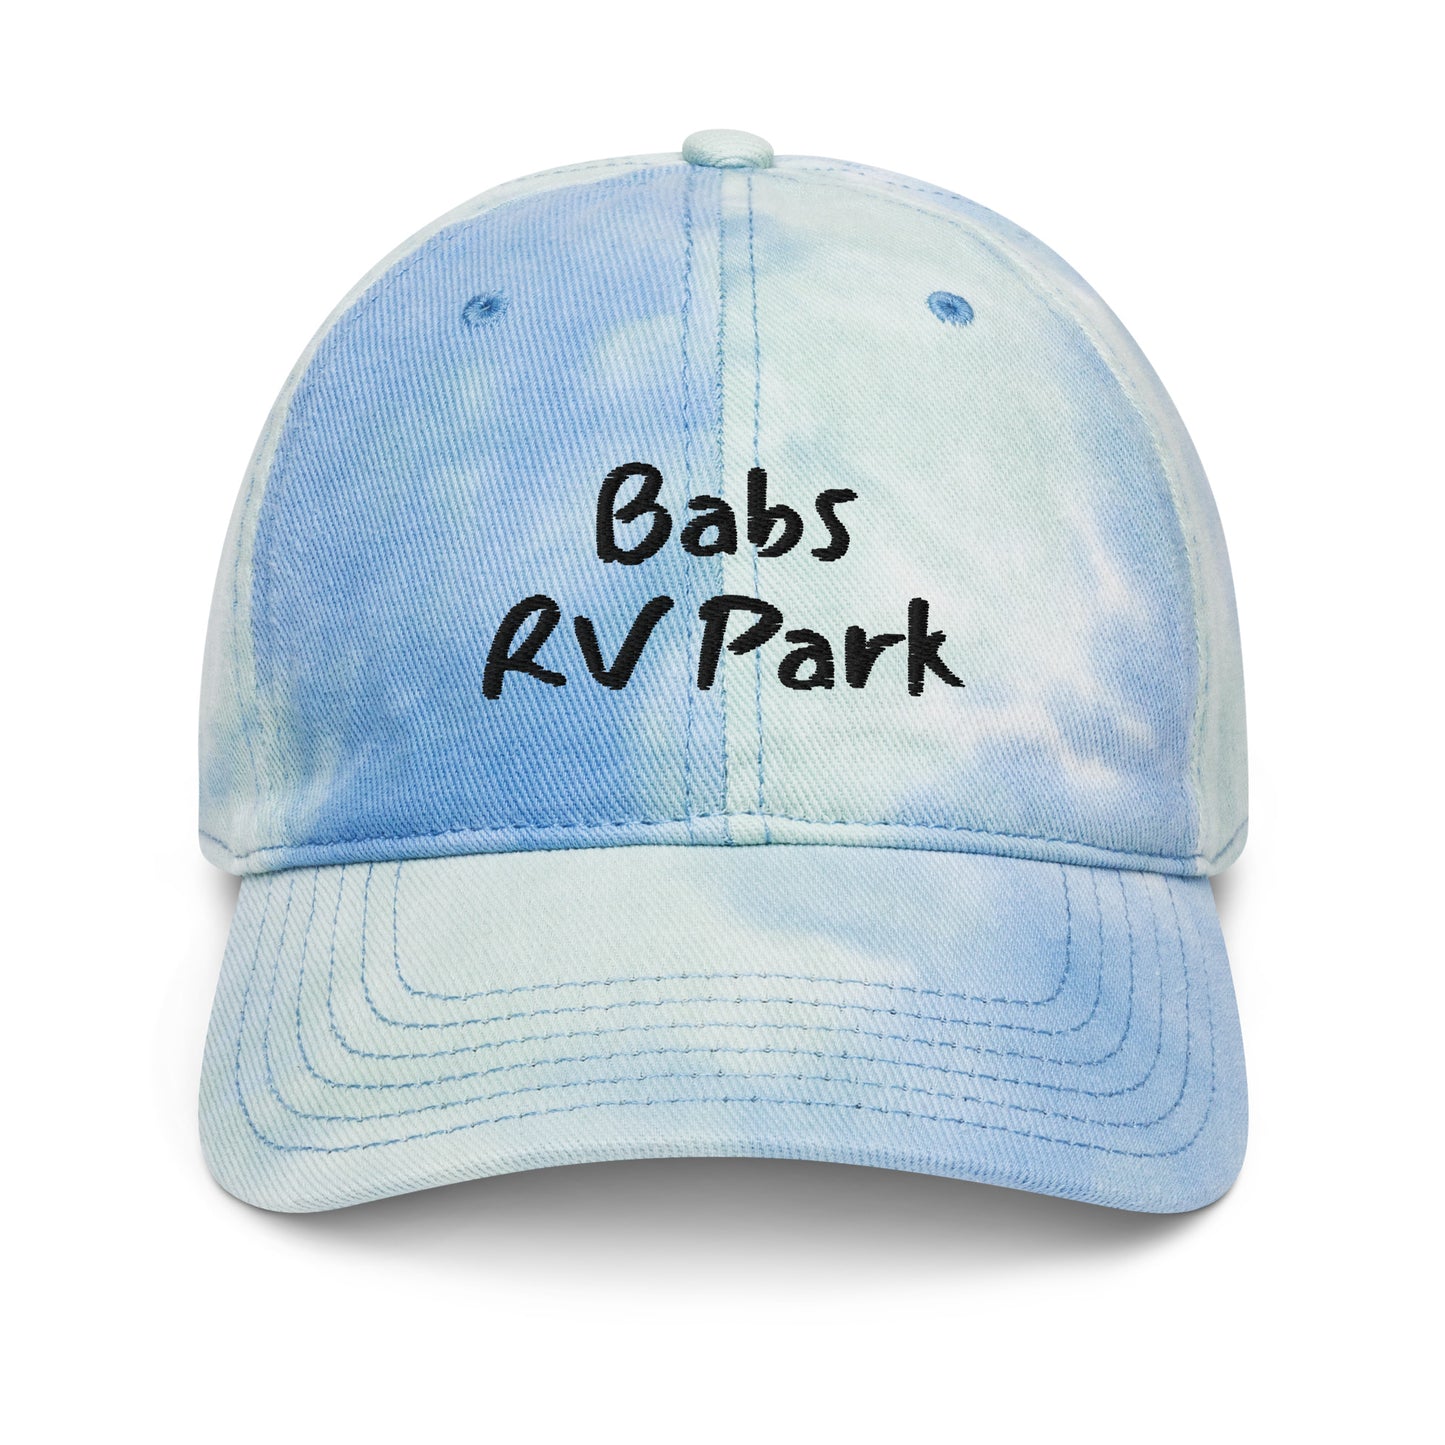 Babs RV Park Tie dye hat - Ghostly Tails